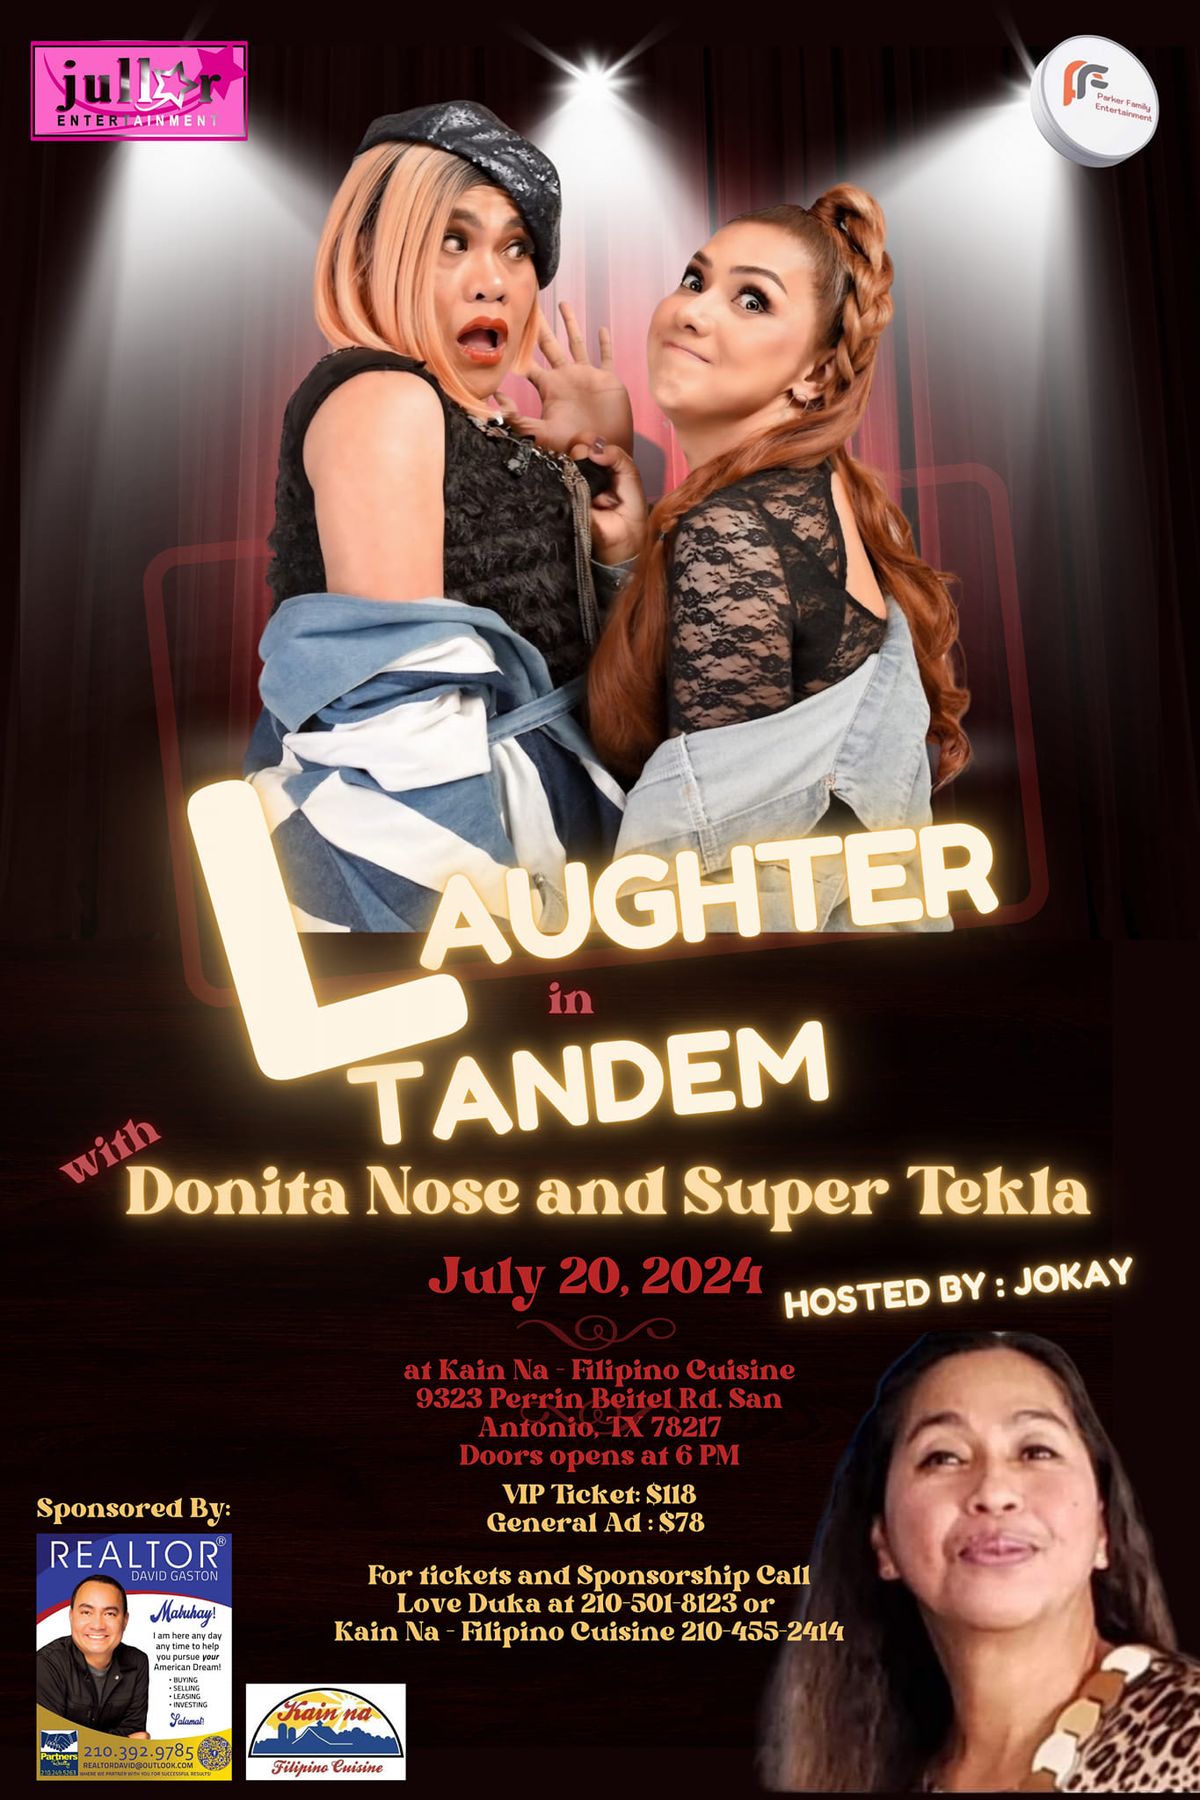 Laughter in Tandem with Donita nose and Tekla hosted by Jokay